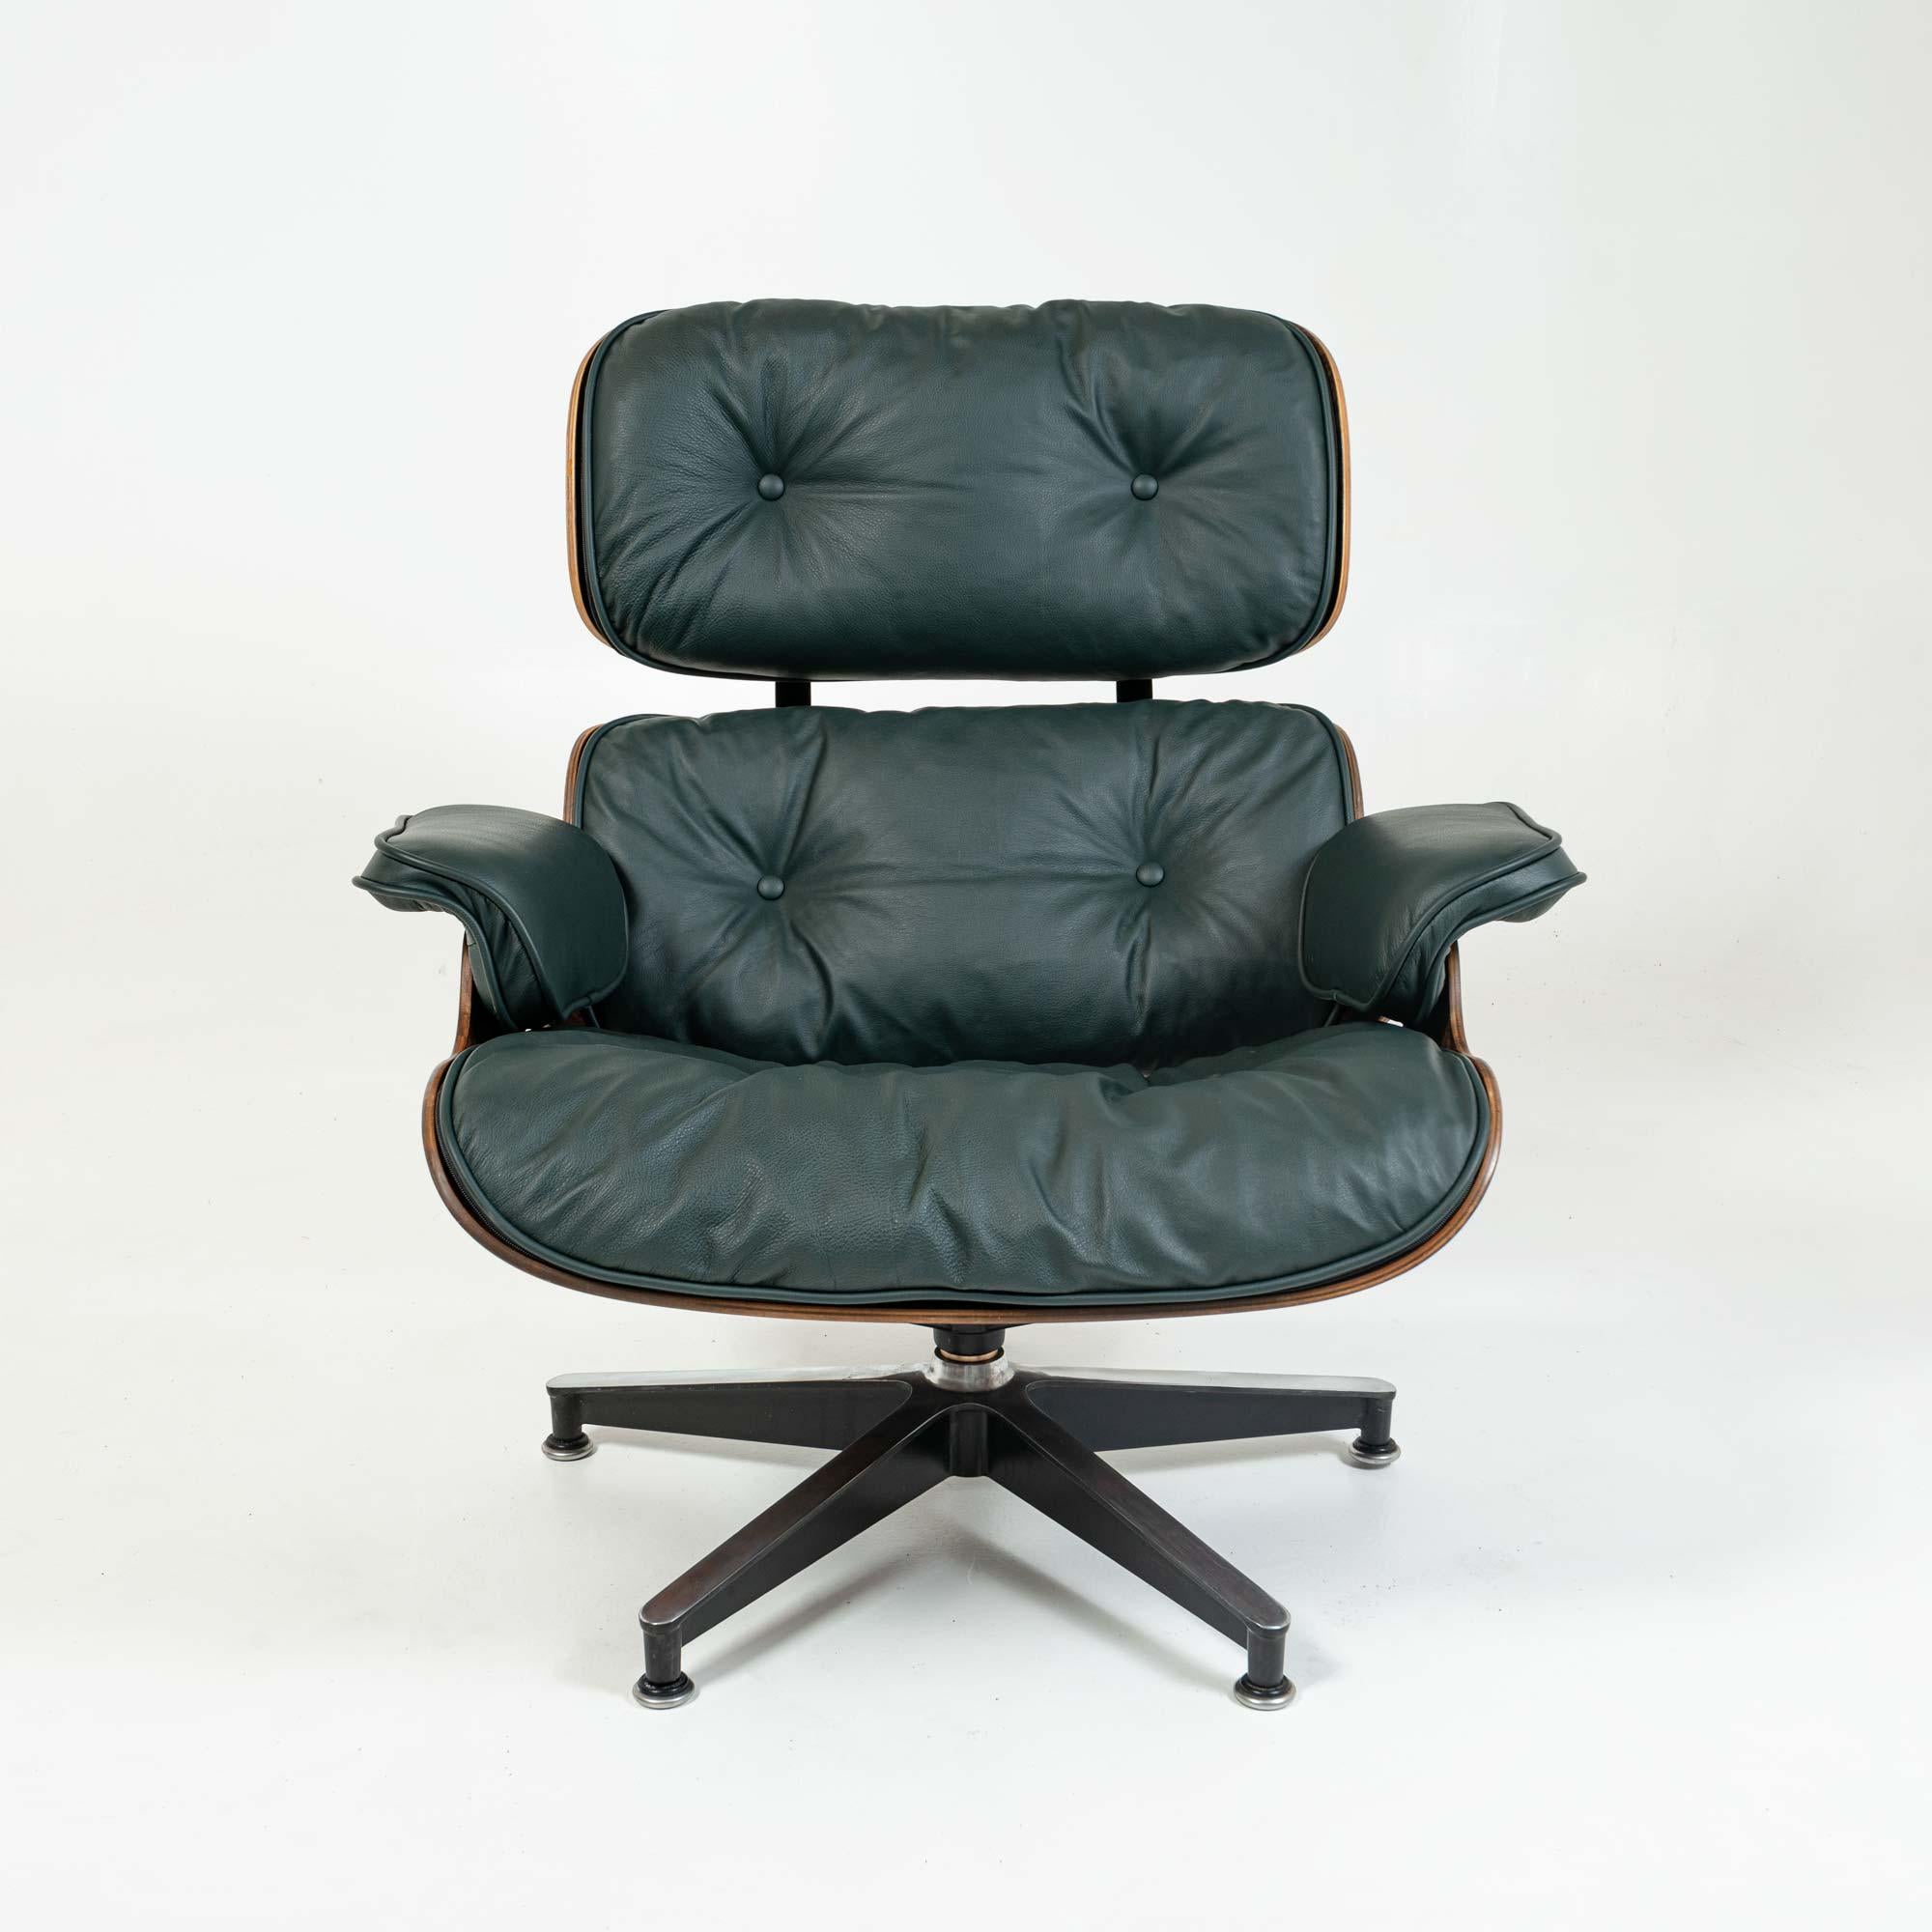 Mid-20th Century 1st Gen Eames Lounge Chair and Boot Glide Ottoman with Elmo Green Leather